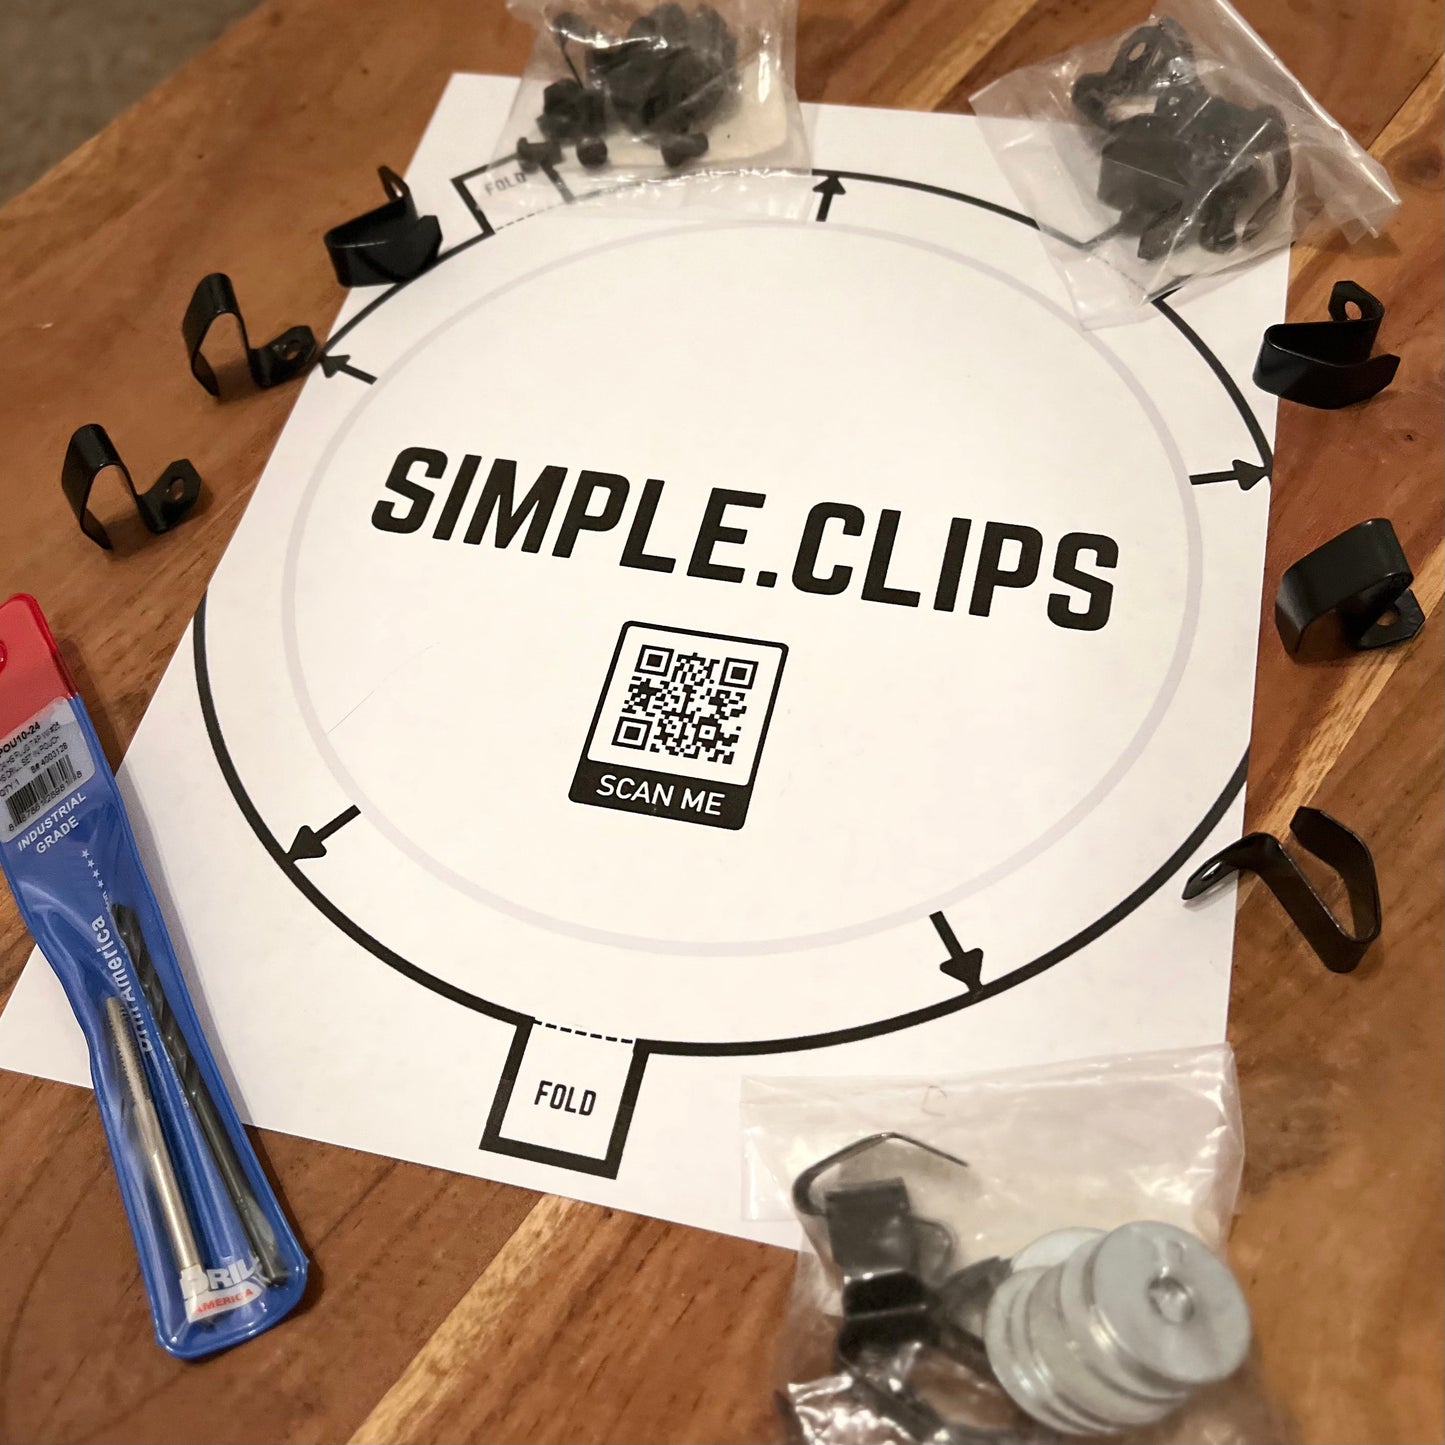 SIMPLE.CLIPS